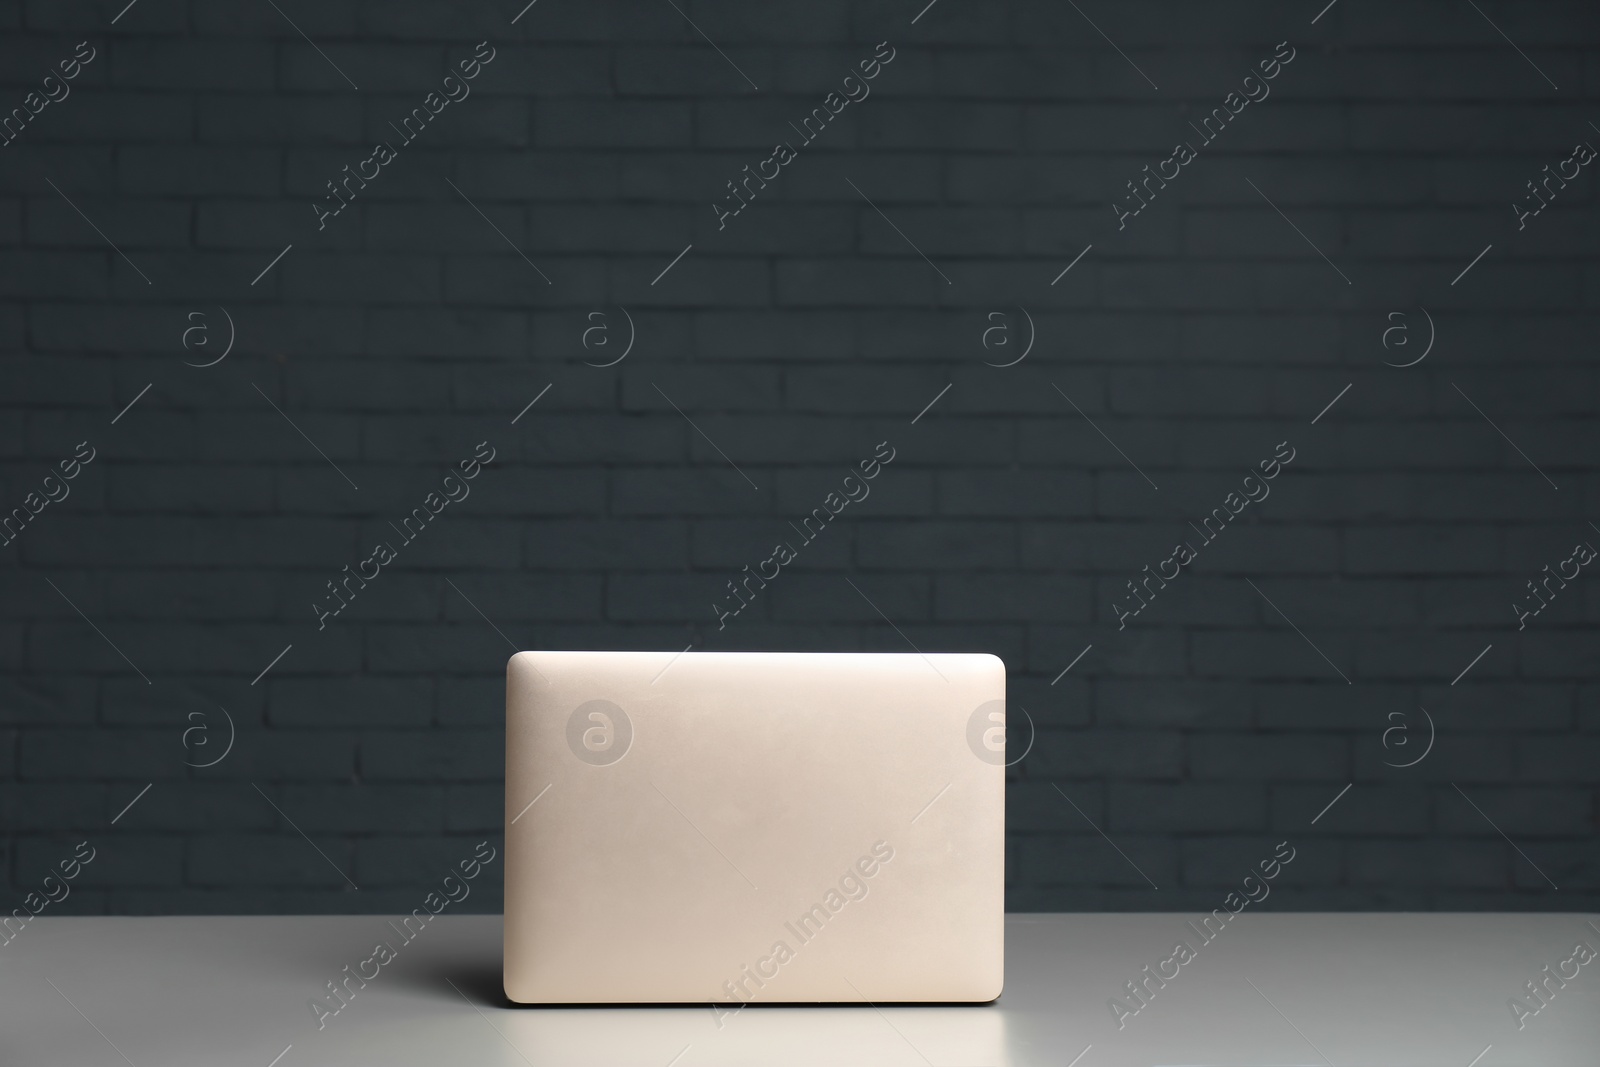 Photo of Modern laptop on table against brick wall